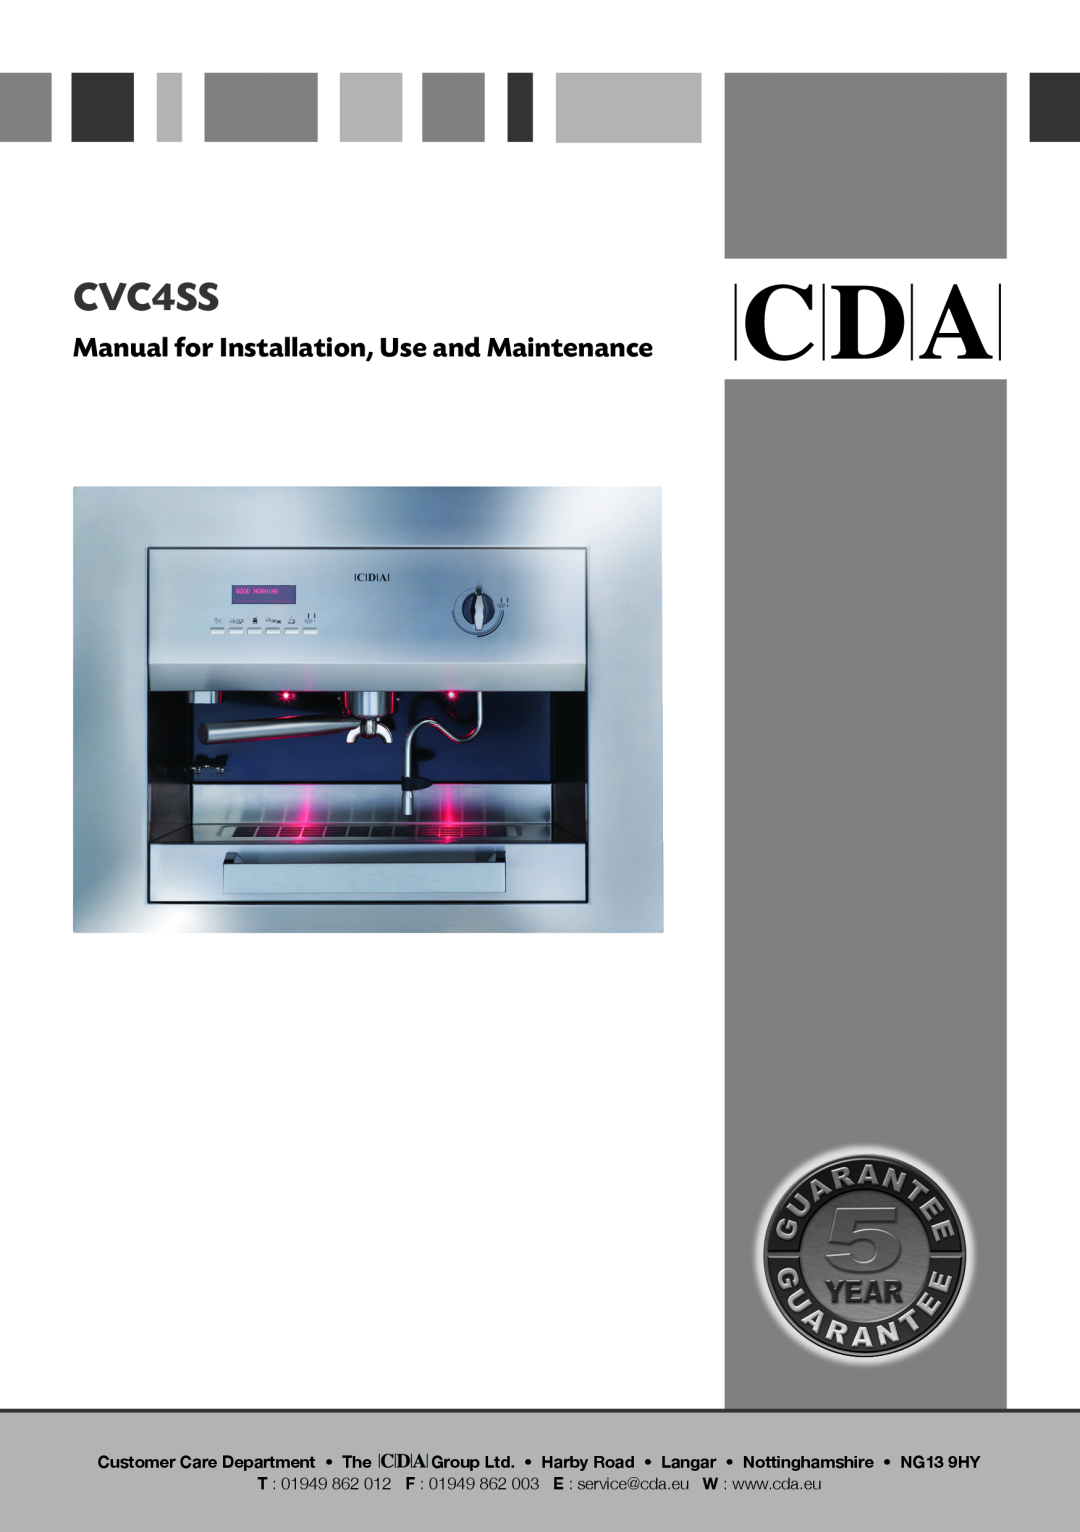 CDA CVC4SS manual Manual for Installation, Use and Maintenance, Customer Care Department The 